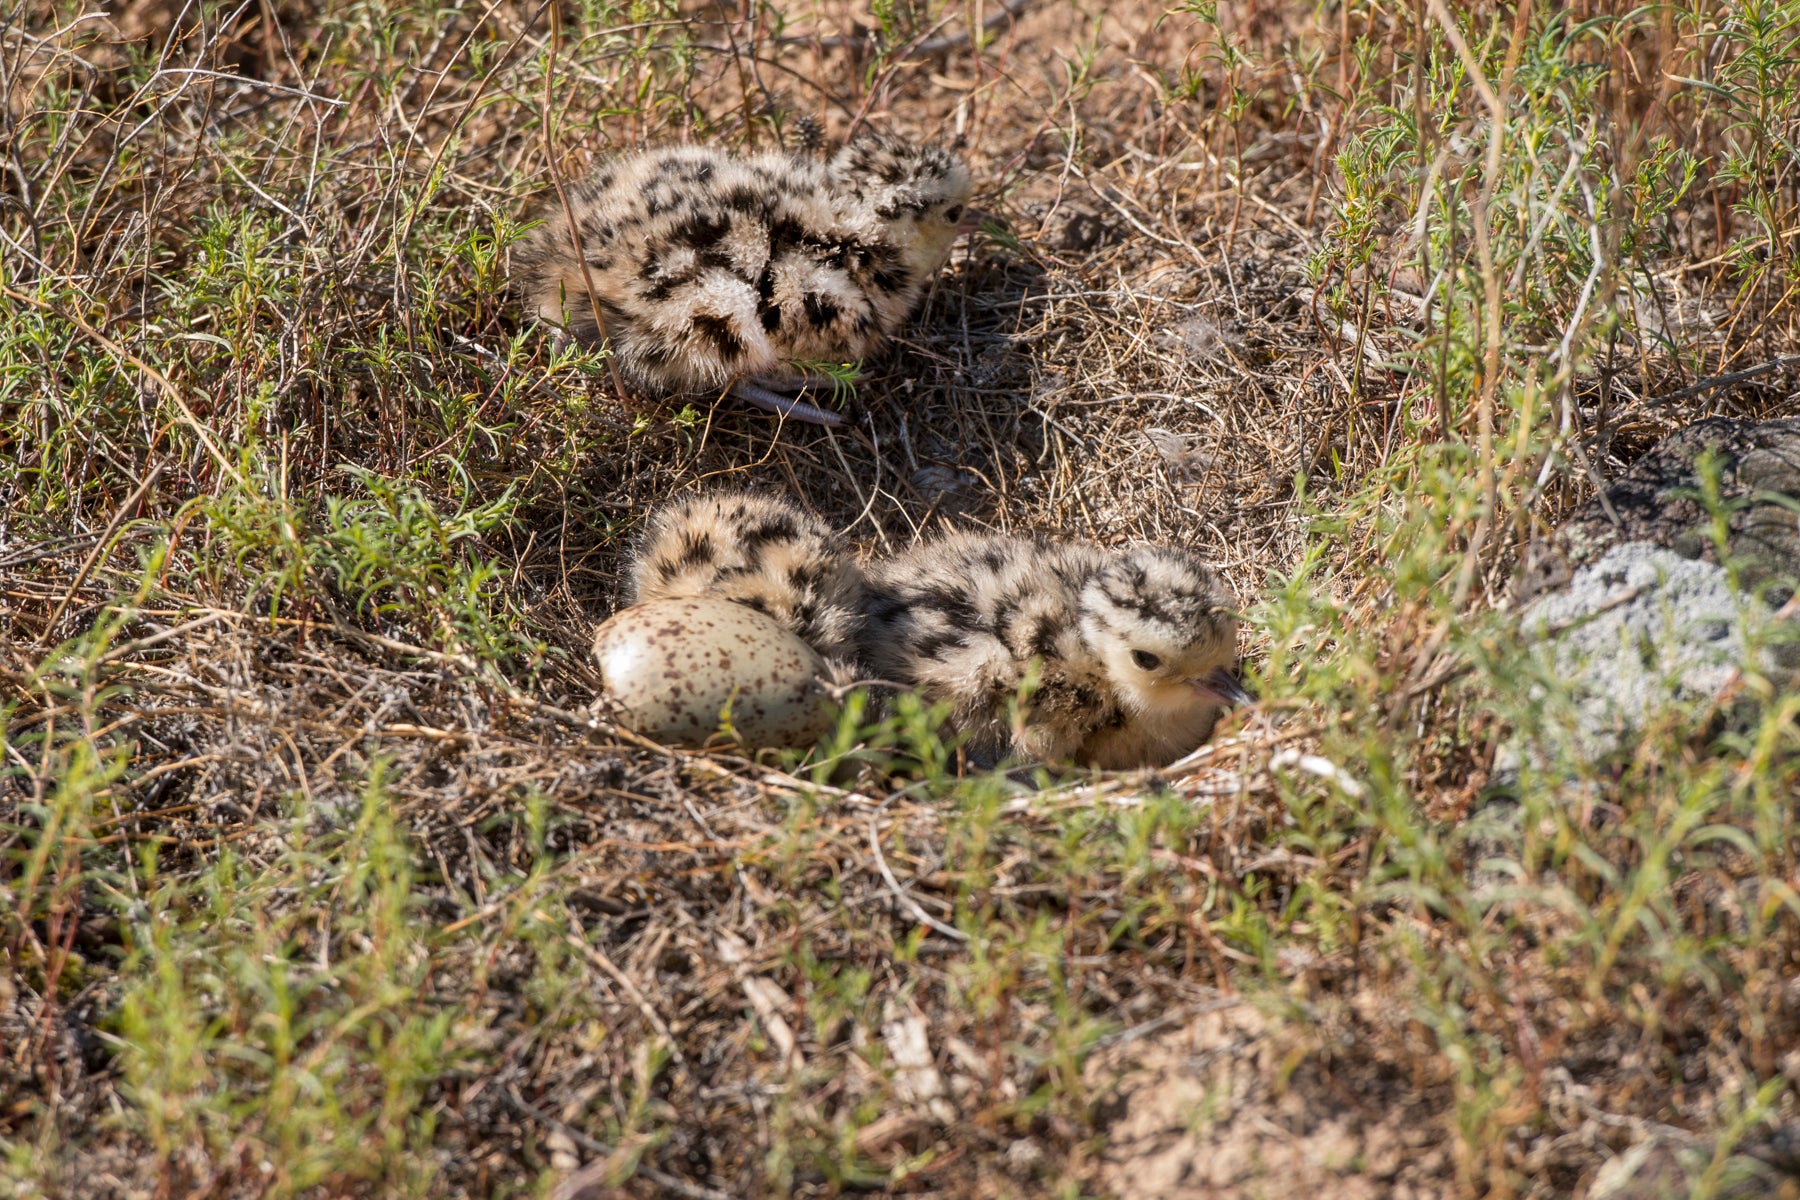 curlew chicks